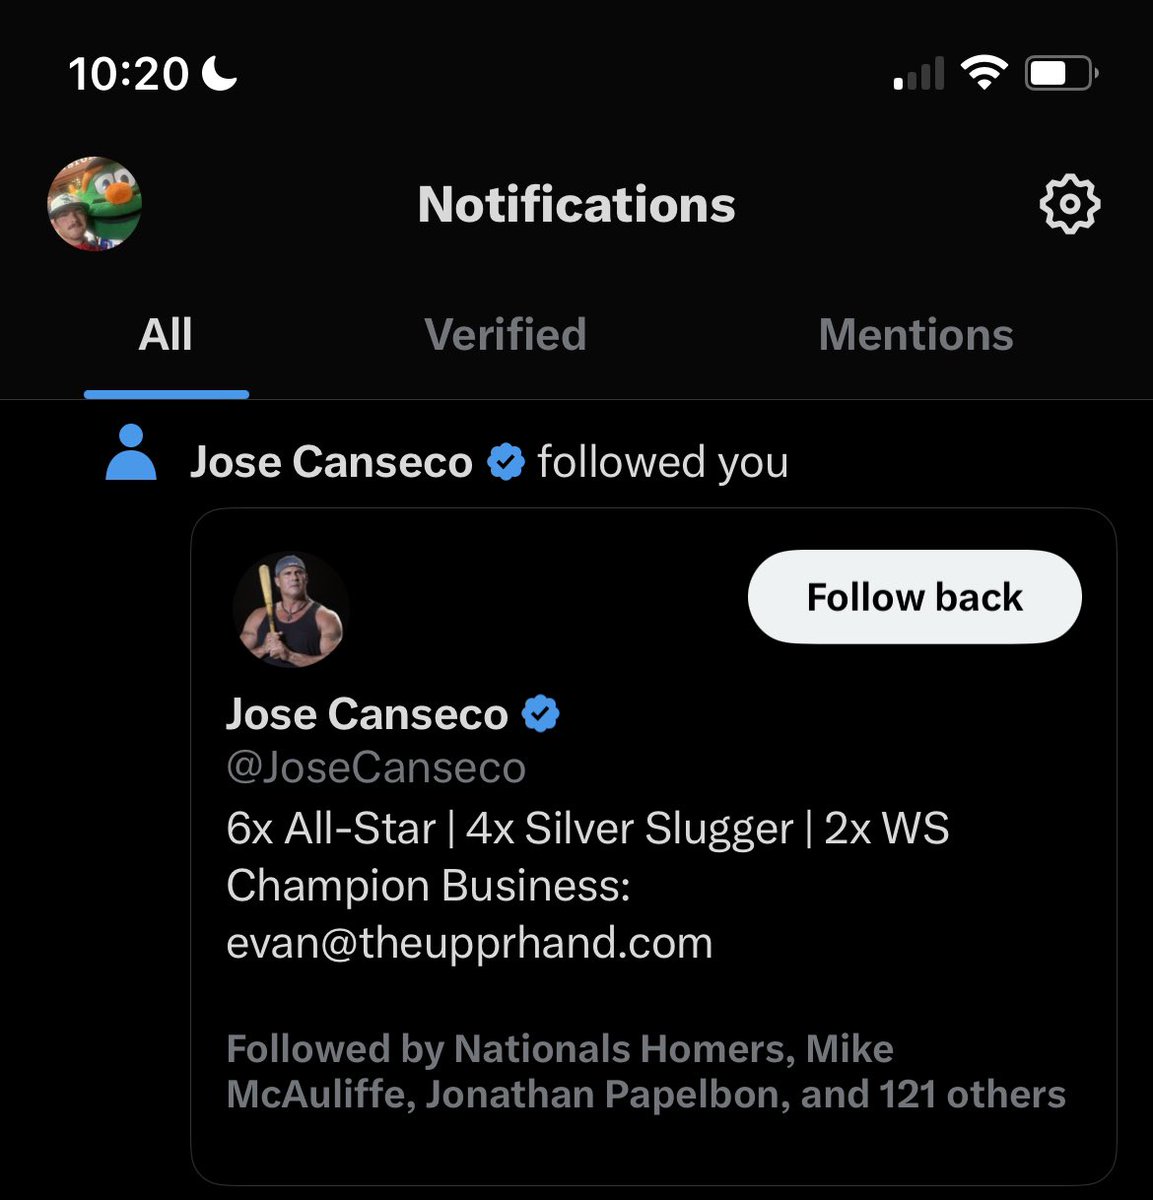 Bring the Worcester Tornadoes back!! @JoseCanseco